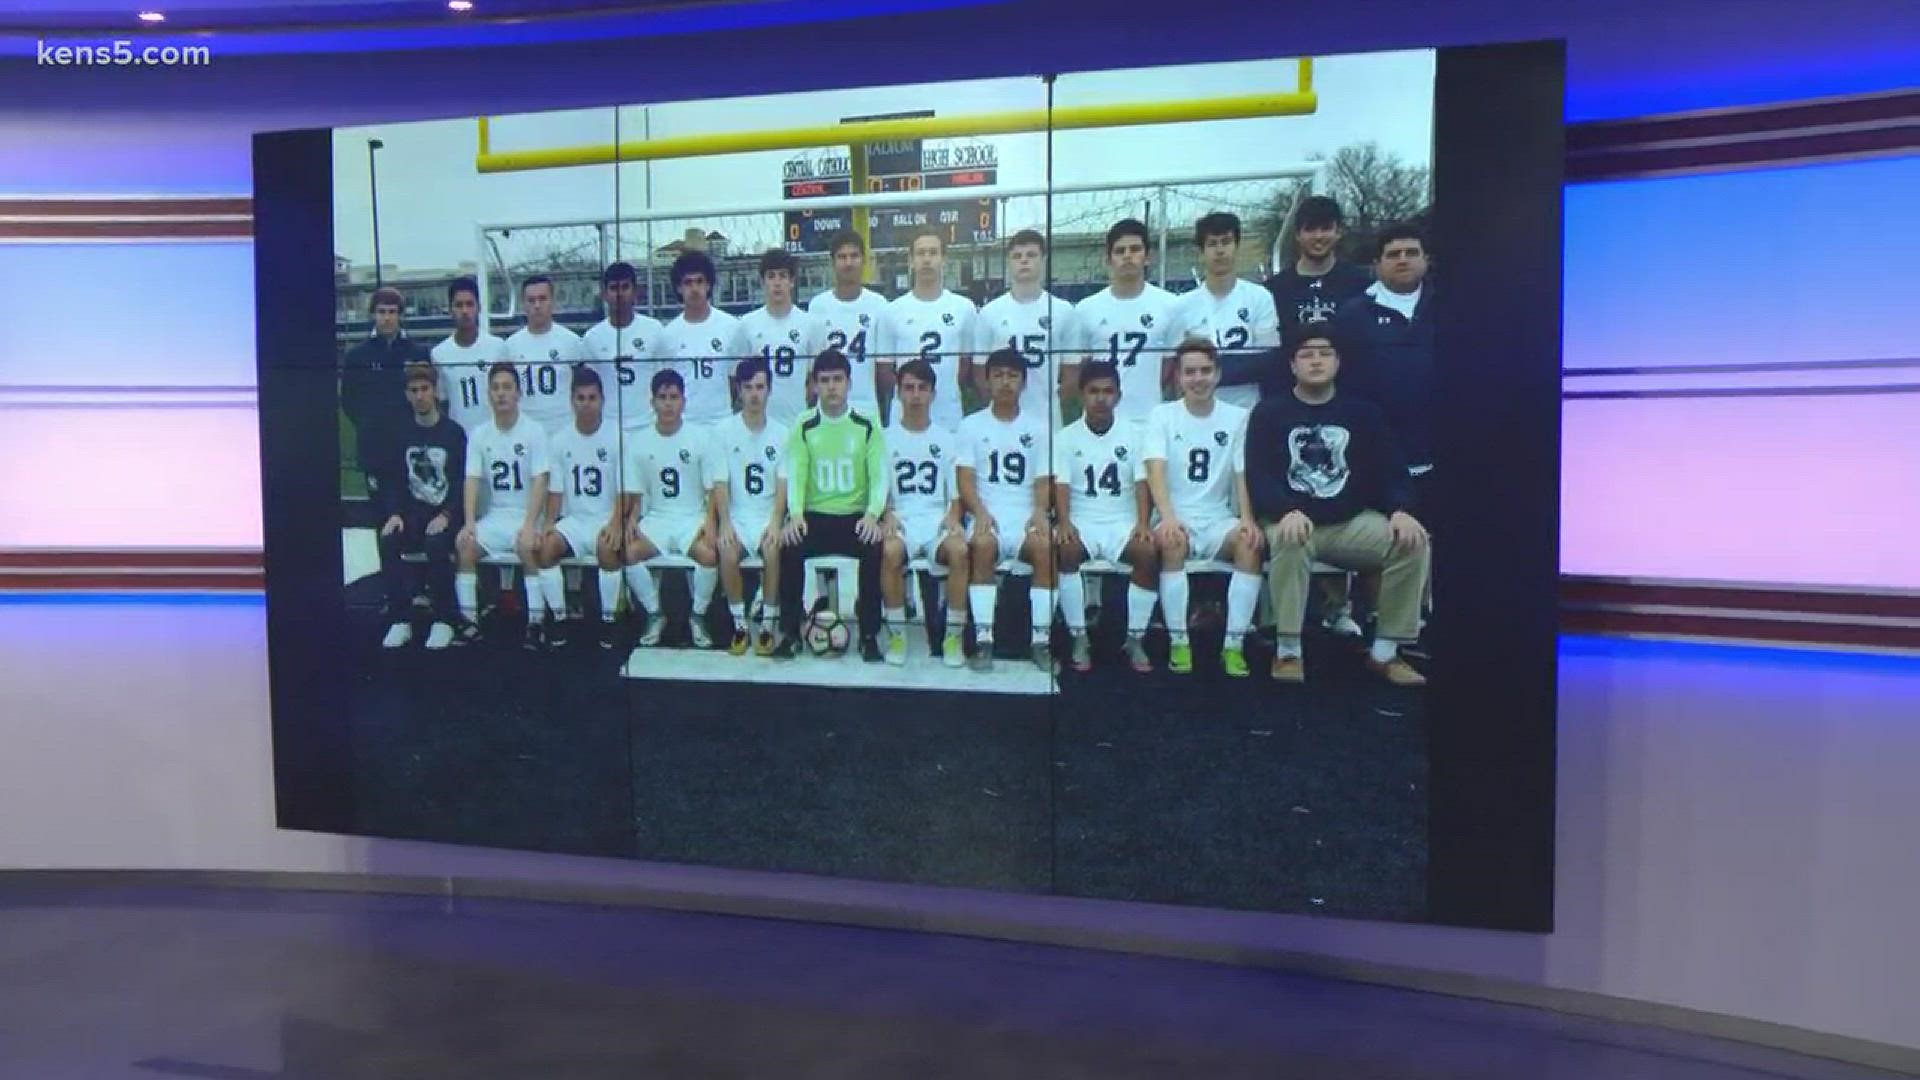 If the Central Catholic boys' soccer team wins today, they advance to the state title game this weekend. Eyewitness News reporter Savannah Louie met the team and learned their secret to success.